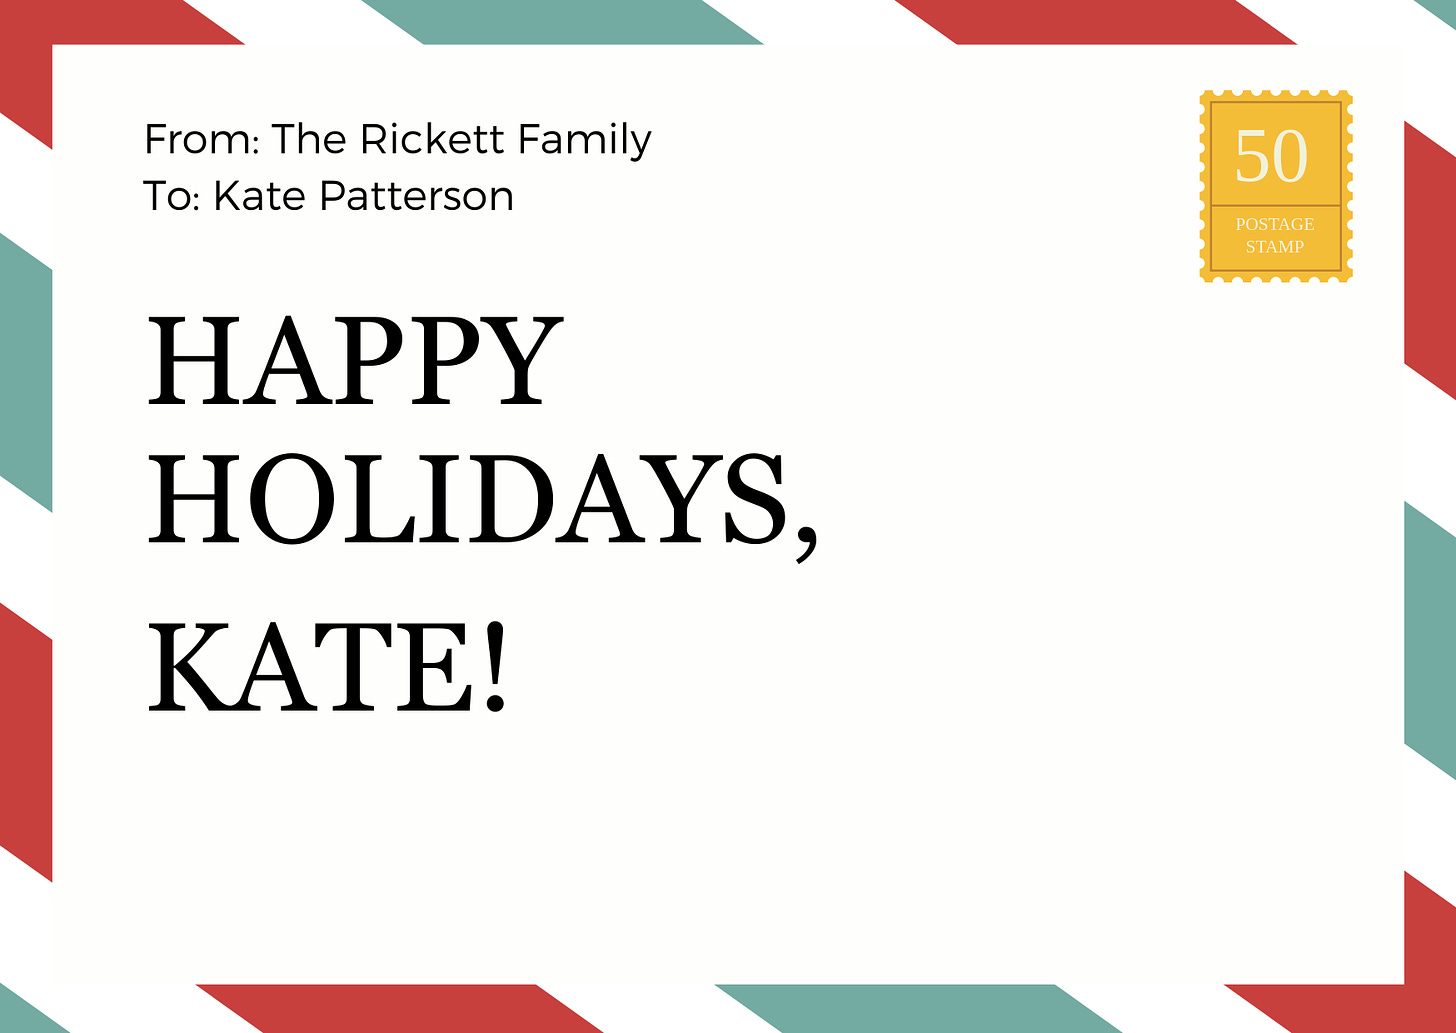 Red and green Christmas card envelope addressed to Kate reads "Happy Holidays" from the Rickett Family. Gold postage stamp in corner.